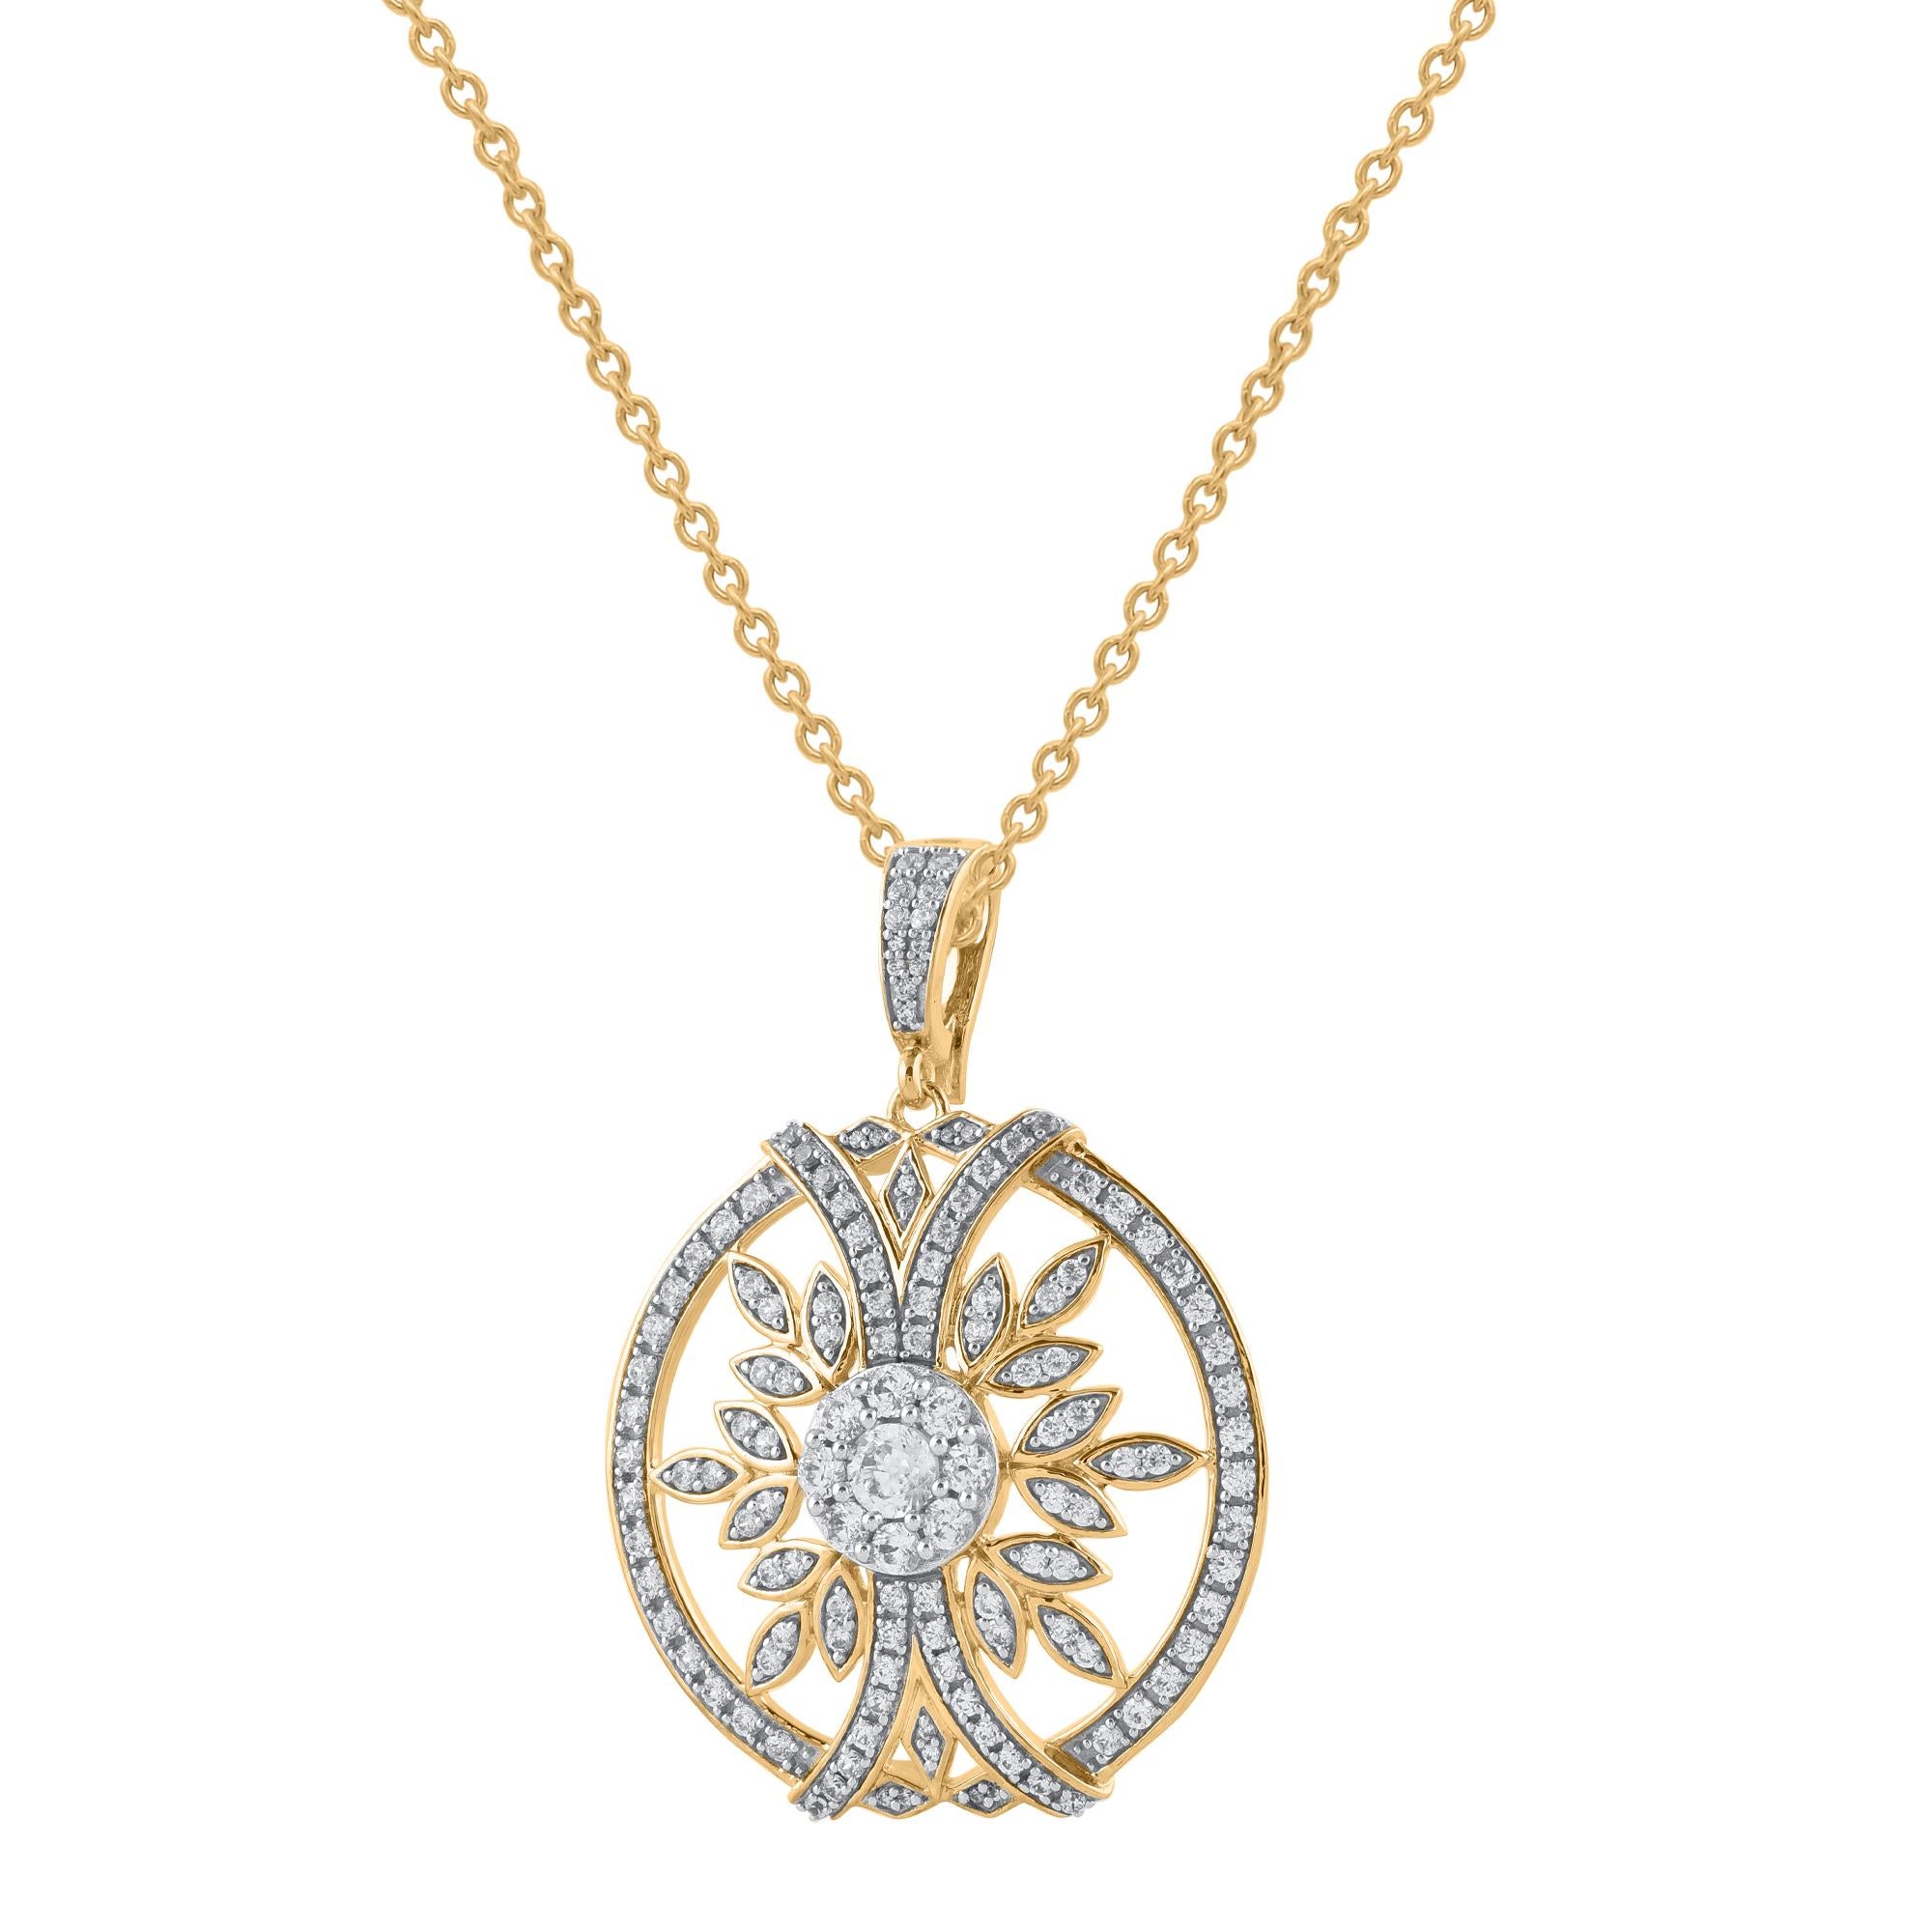 Raise the fashion bar with this stunning diamond pendant. This timeless design created in 18kt yellow gold, this circle cluster leaf pendant features 133 brilliant cut & single cut diamonds in prong and pave settings. Diamonds are graded as H-I